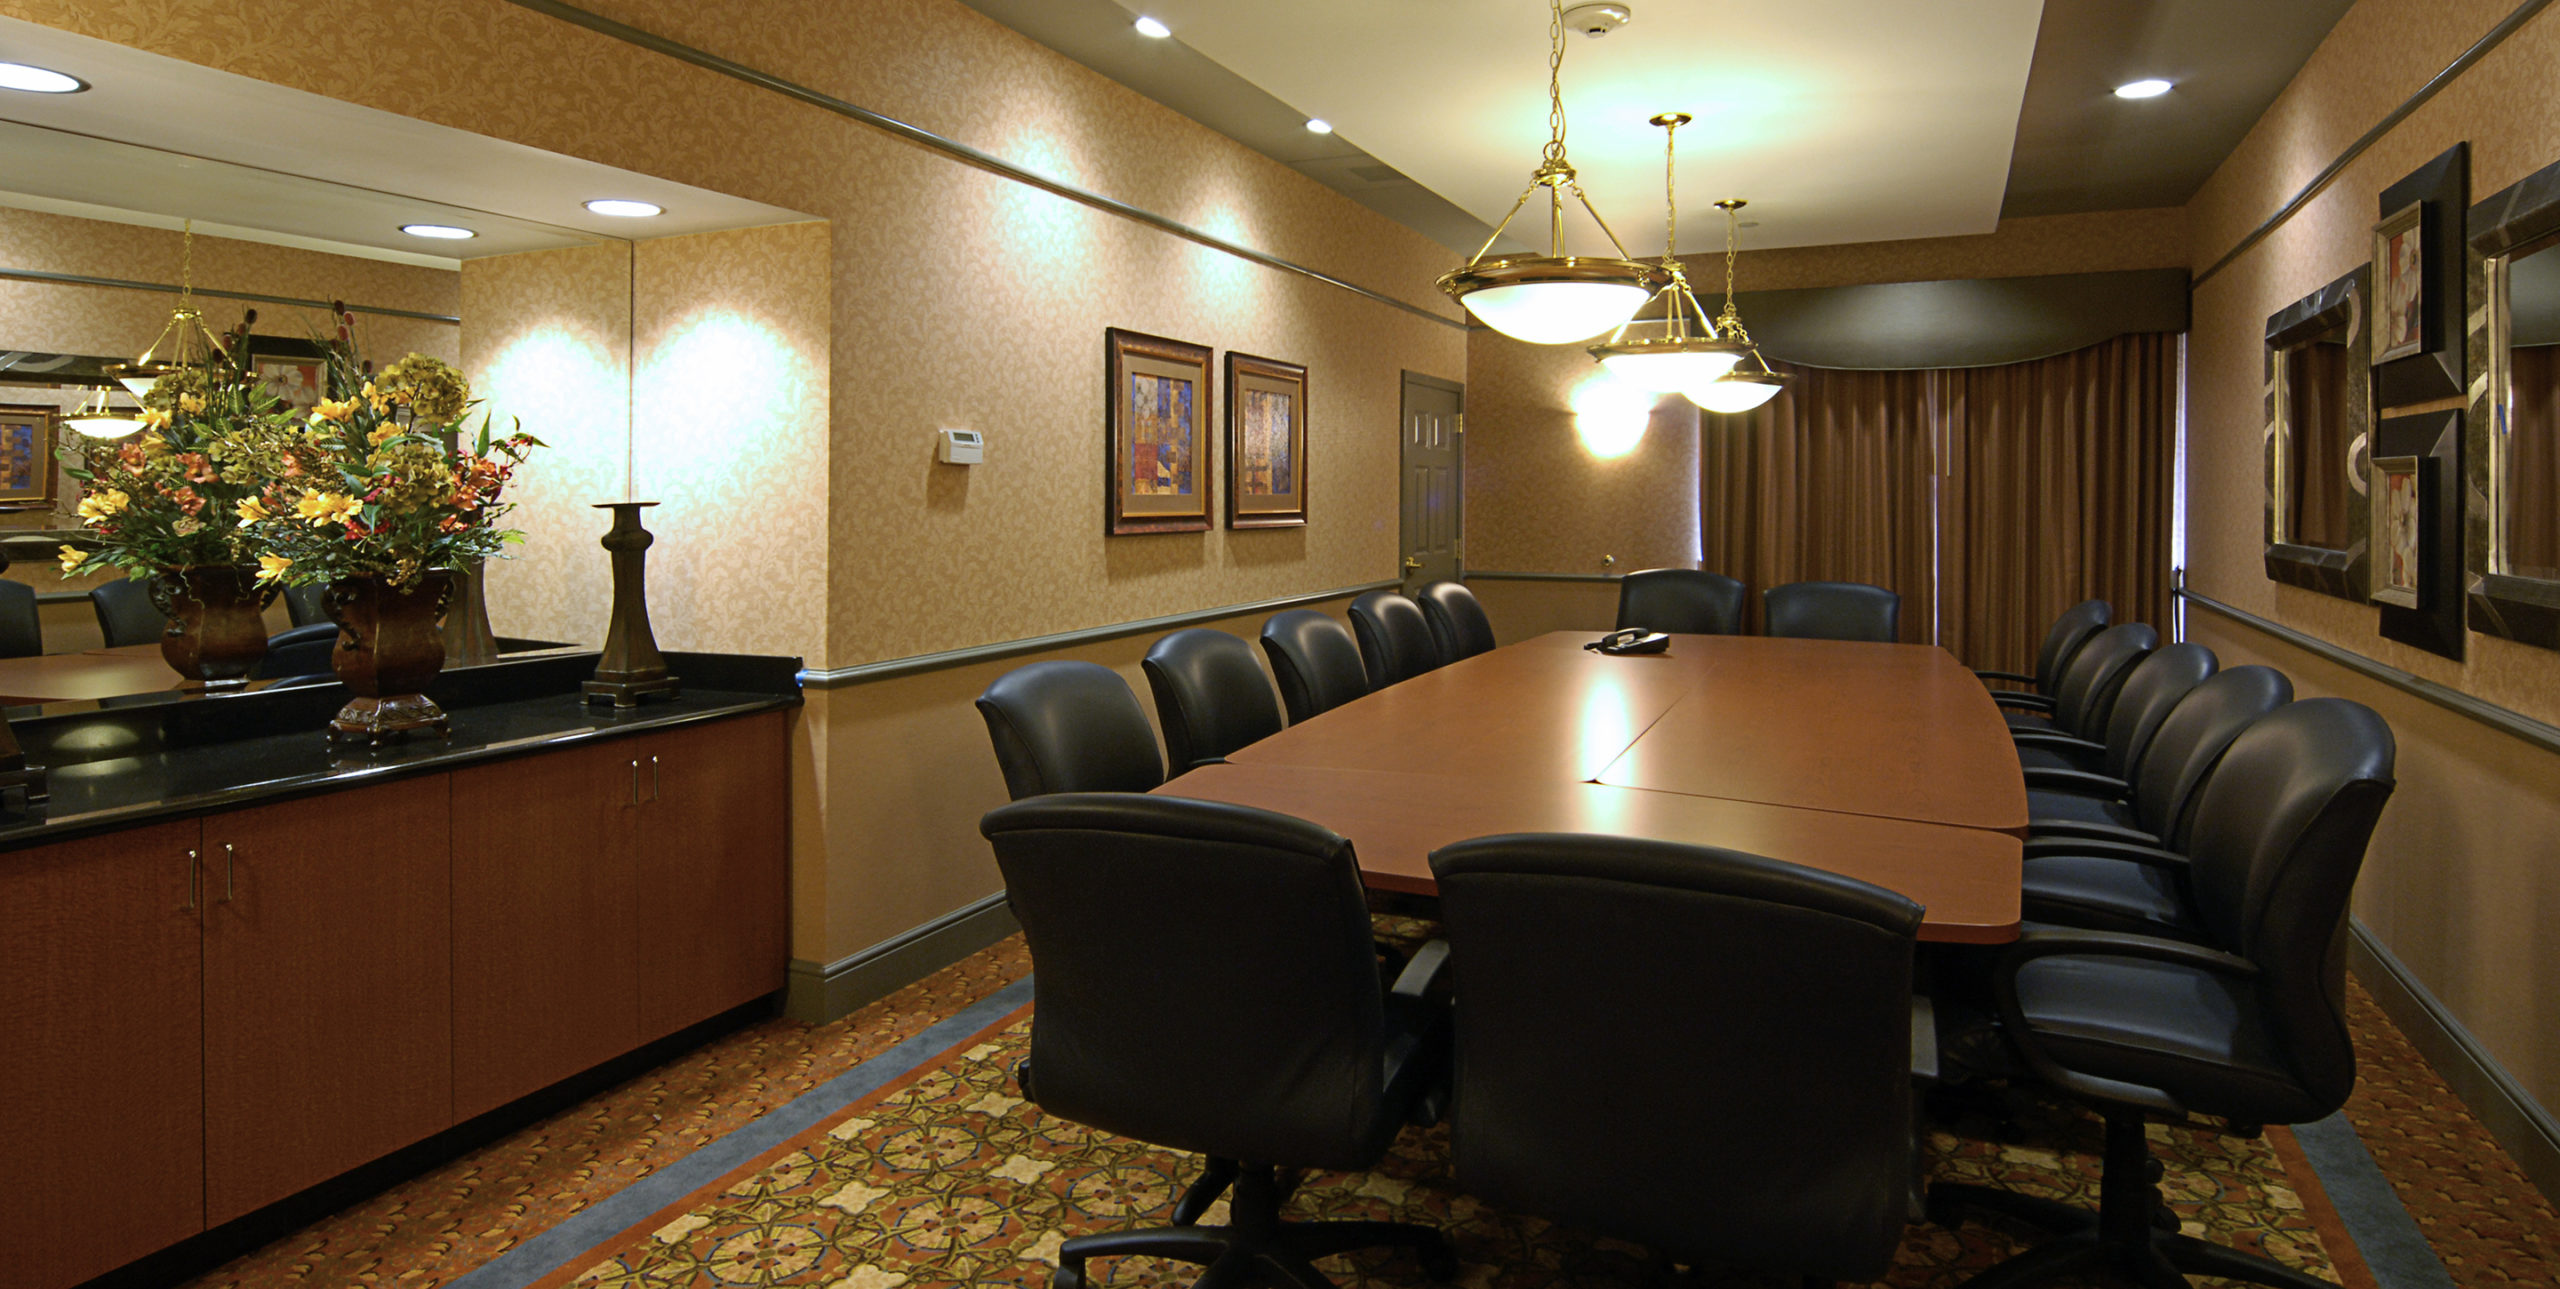 Conference room with 14 chairs at La Quinta Inn and Suites by Wyndham Islip at 10 Aero Road, Bohemia